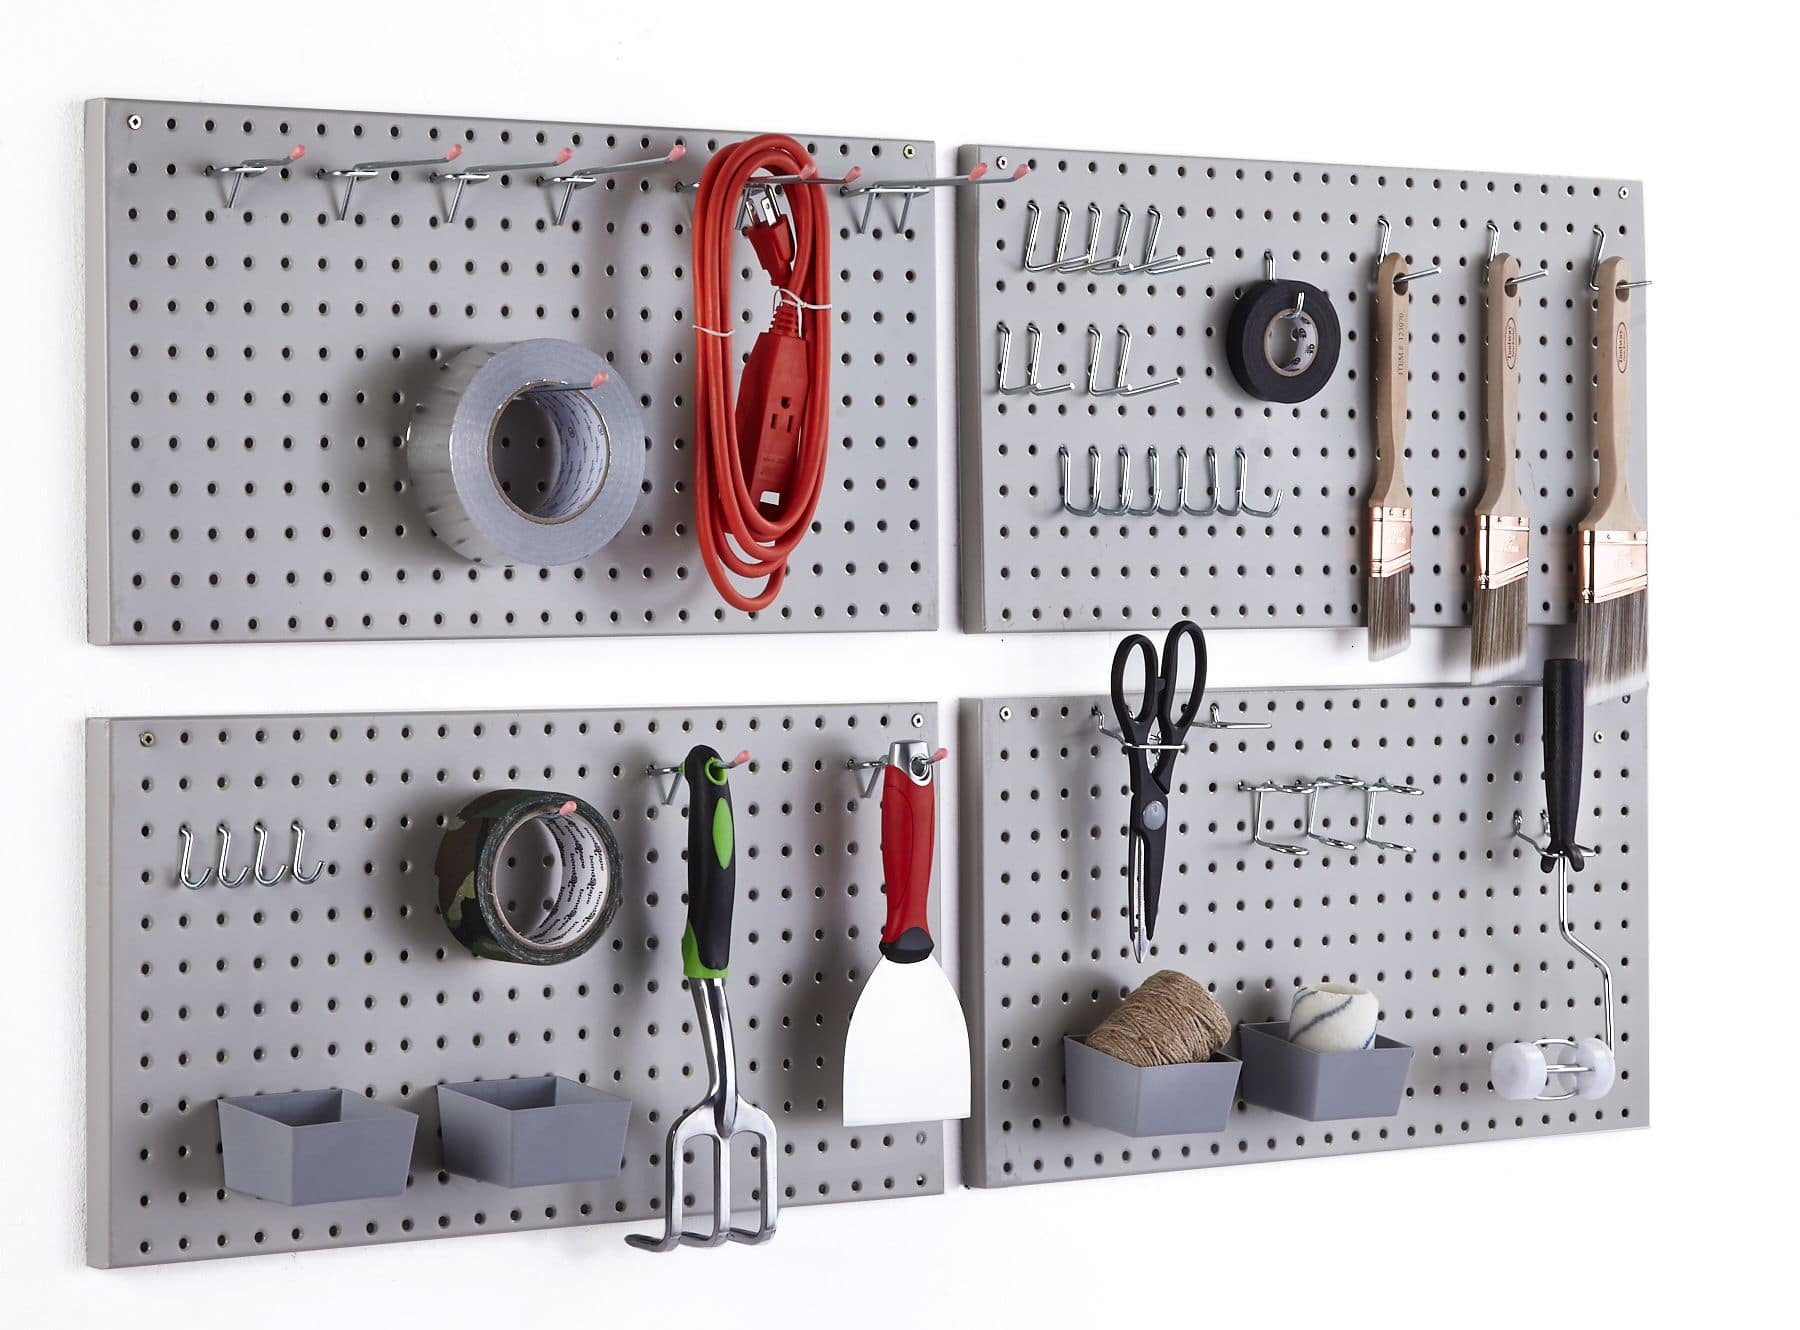 Mastercraft Steel Pegboard Kit, Includes Four 12x24-in Panels, 48